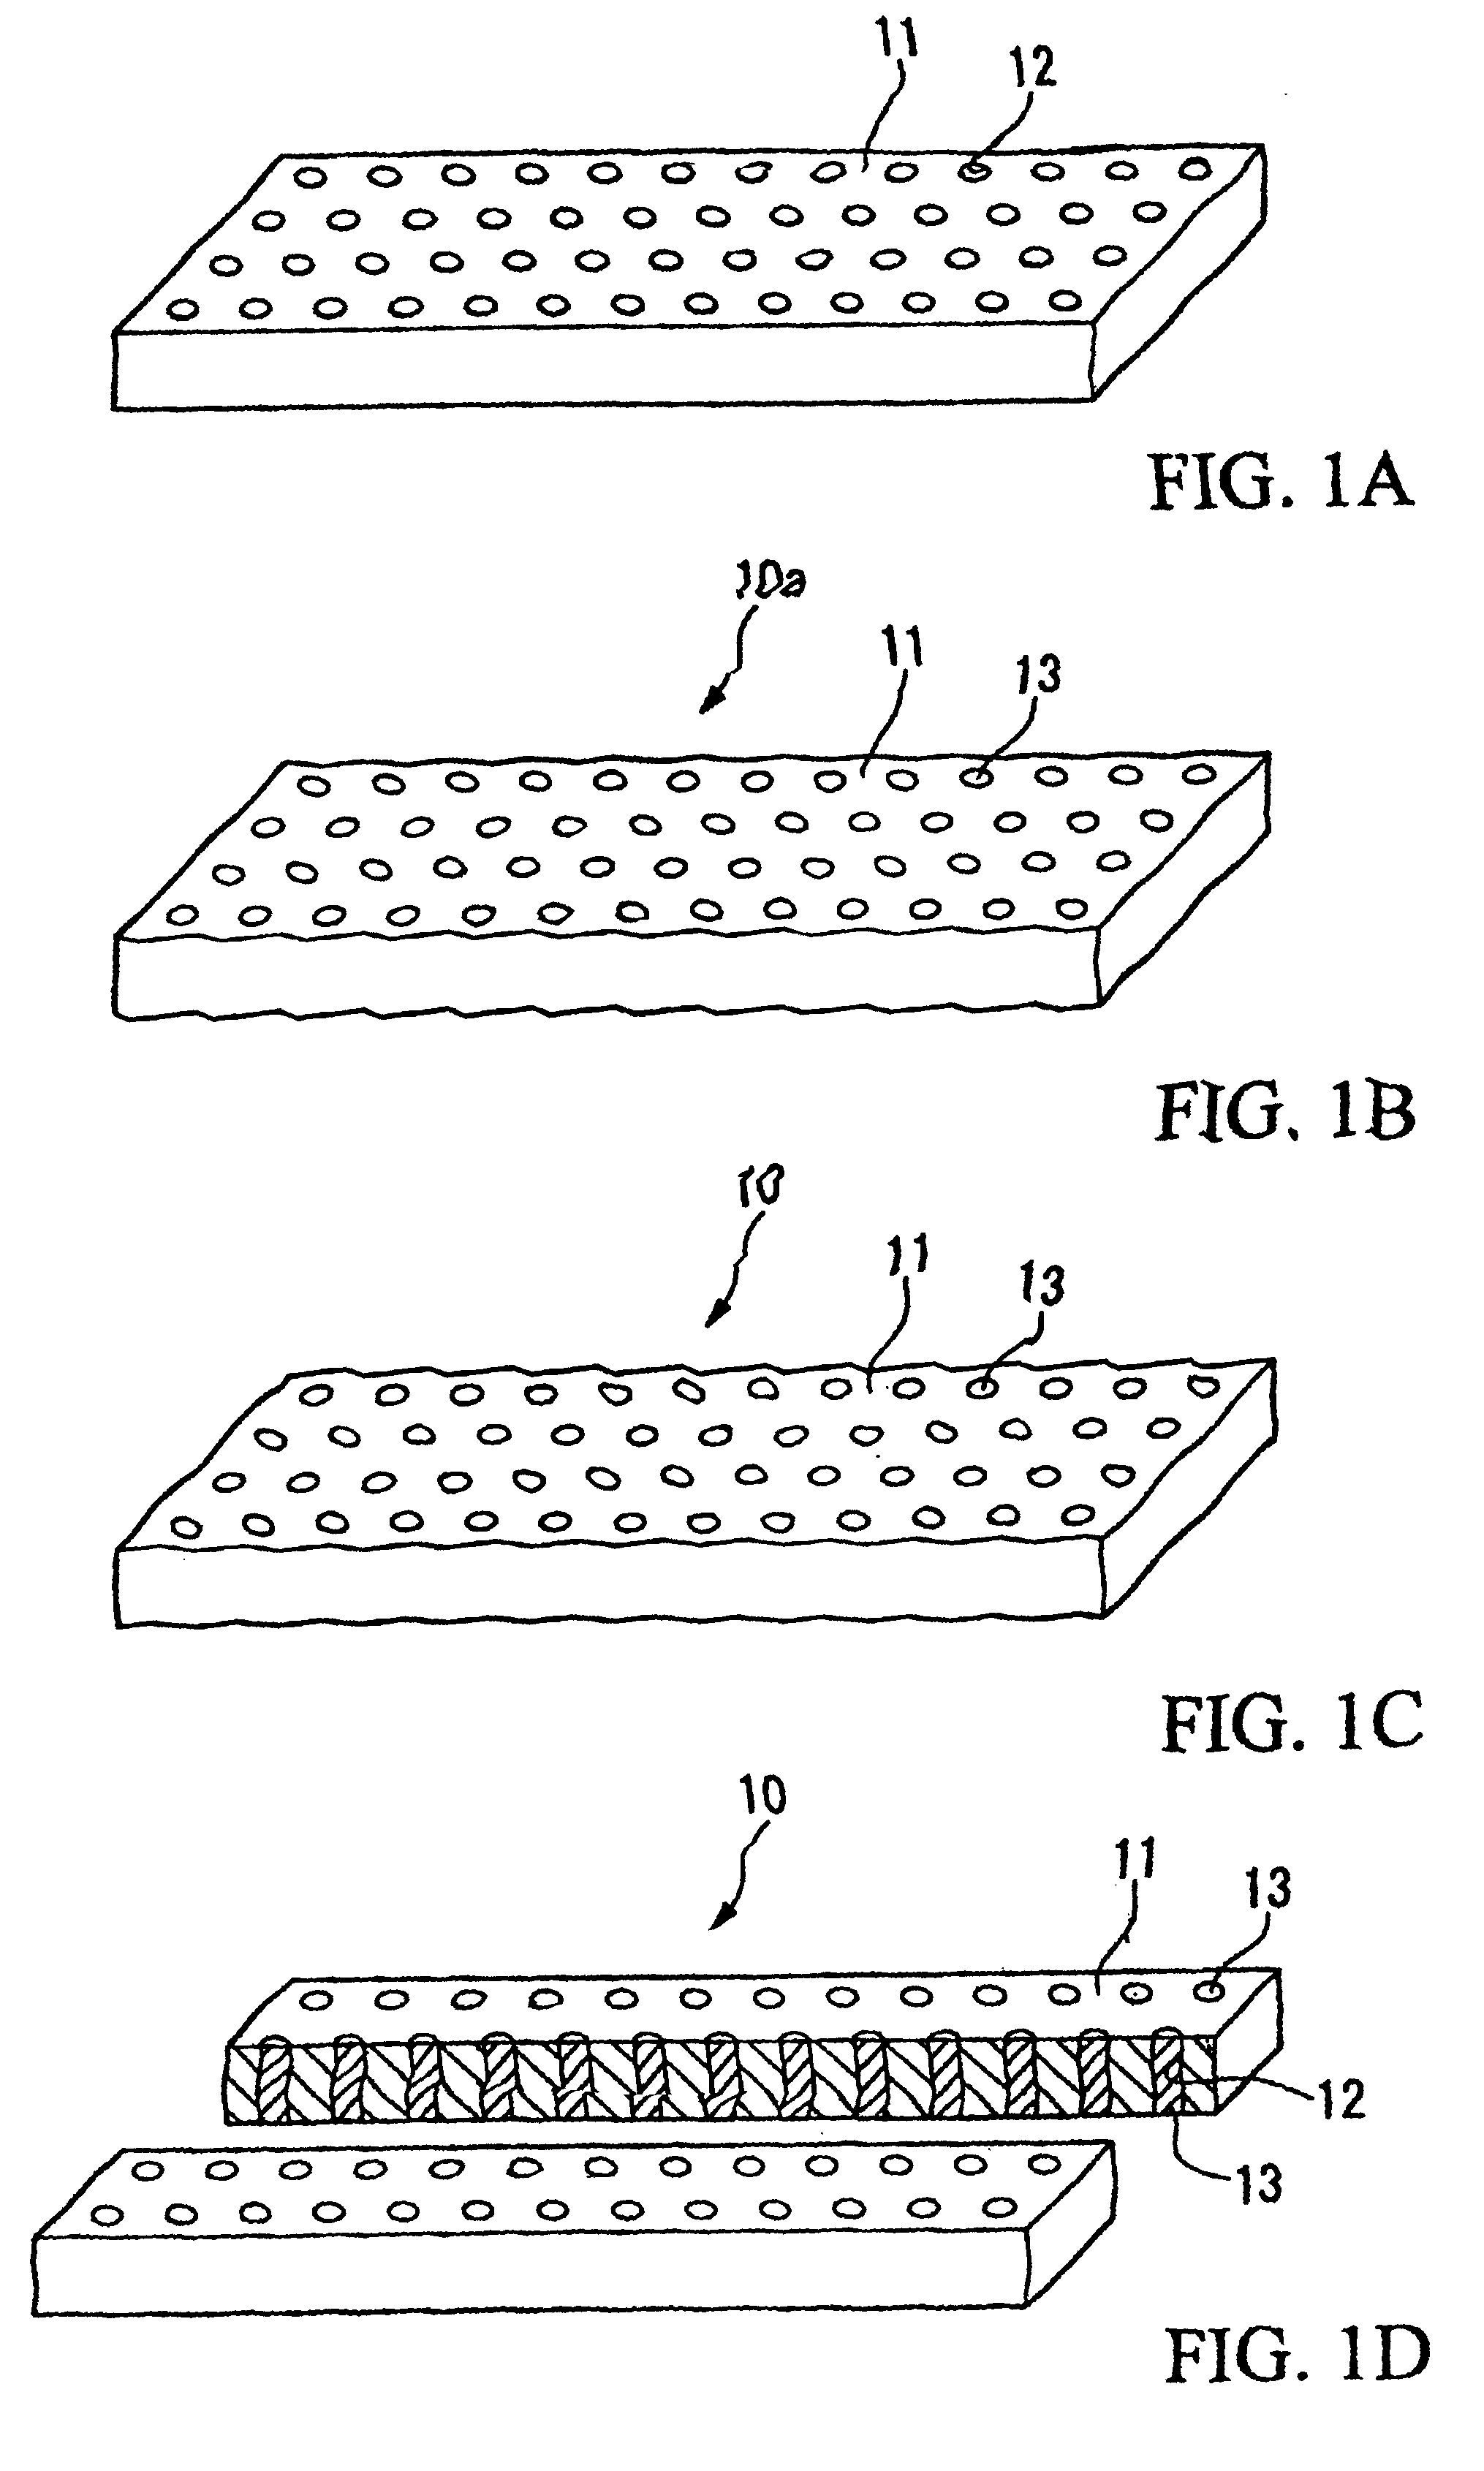 Heat radiator for electronic device and method of making it